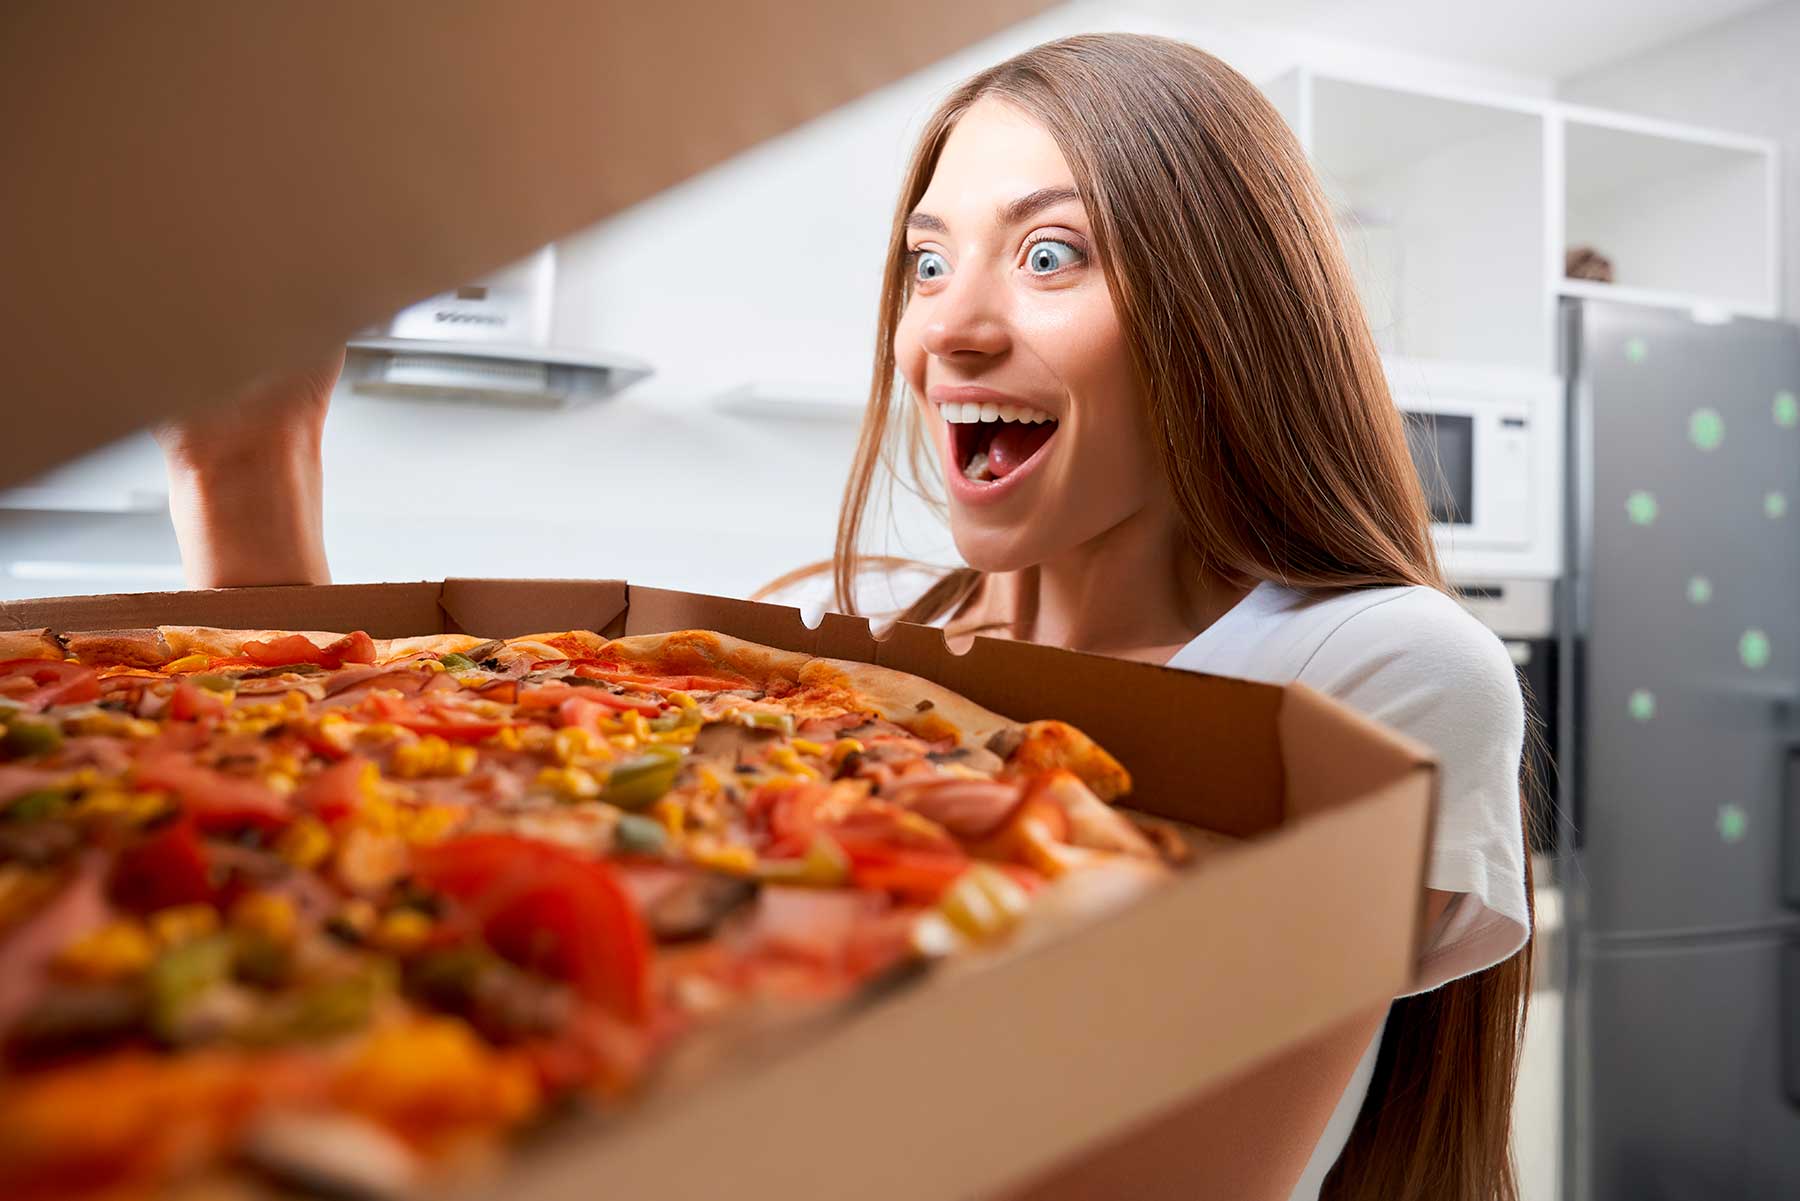 Surprise food delivery builds relationships